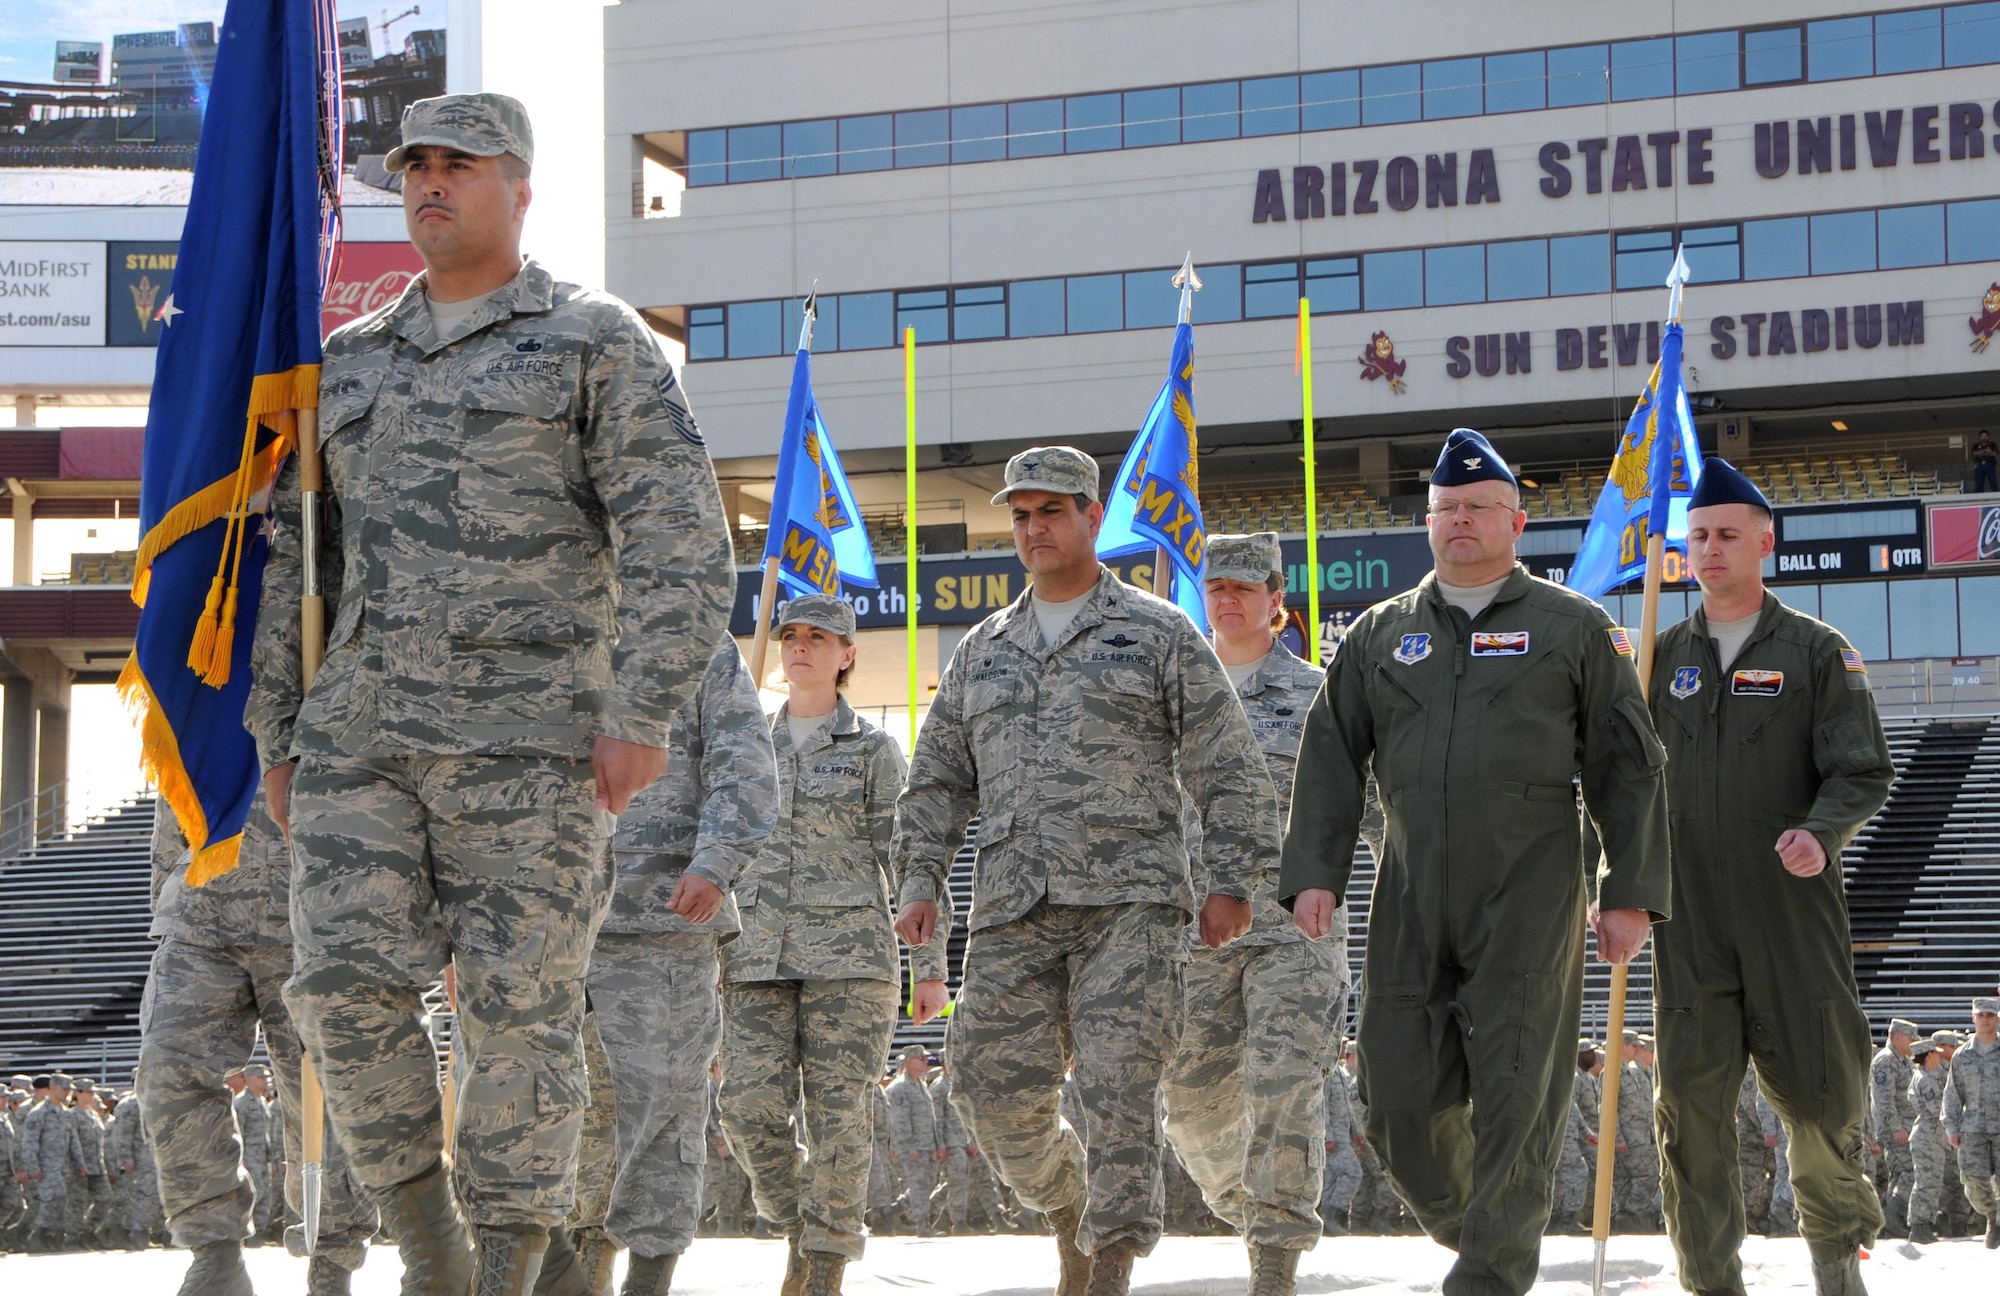 Senior Master Sgt. Alex Brown, front, leads the Arizona Air National Guard’s 161st Air Refueling Wing during a march at Sun Devil Stadium in Tempe, Ariz., Dec. 7, 2014. Brown’s prior experience as military training instructor made him the unit’s resident expert on drill and ceremonies and gave him skills that, he said, helped him graduate from law school. Brown recently passed the Arizona bar exam and fulfilled a personal dream to become an attorney. (U.S. Air National Guard photo/Tech. Sgt. Courtney Enos)